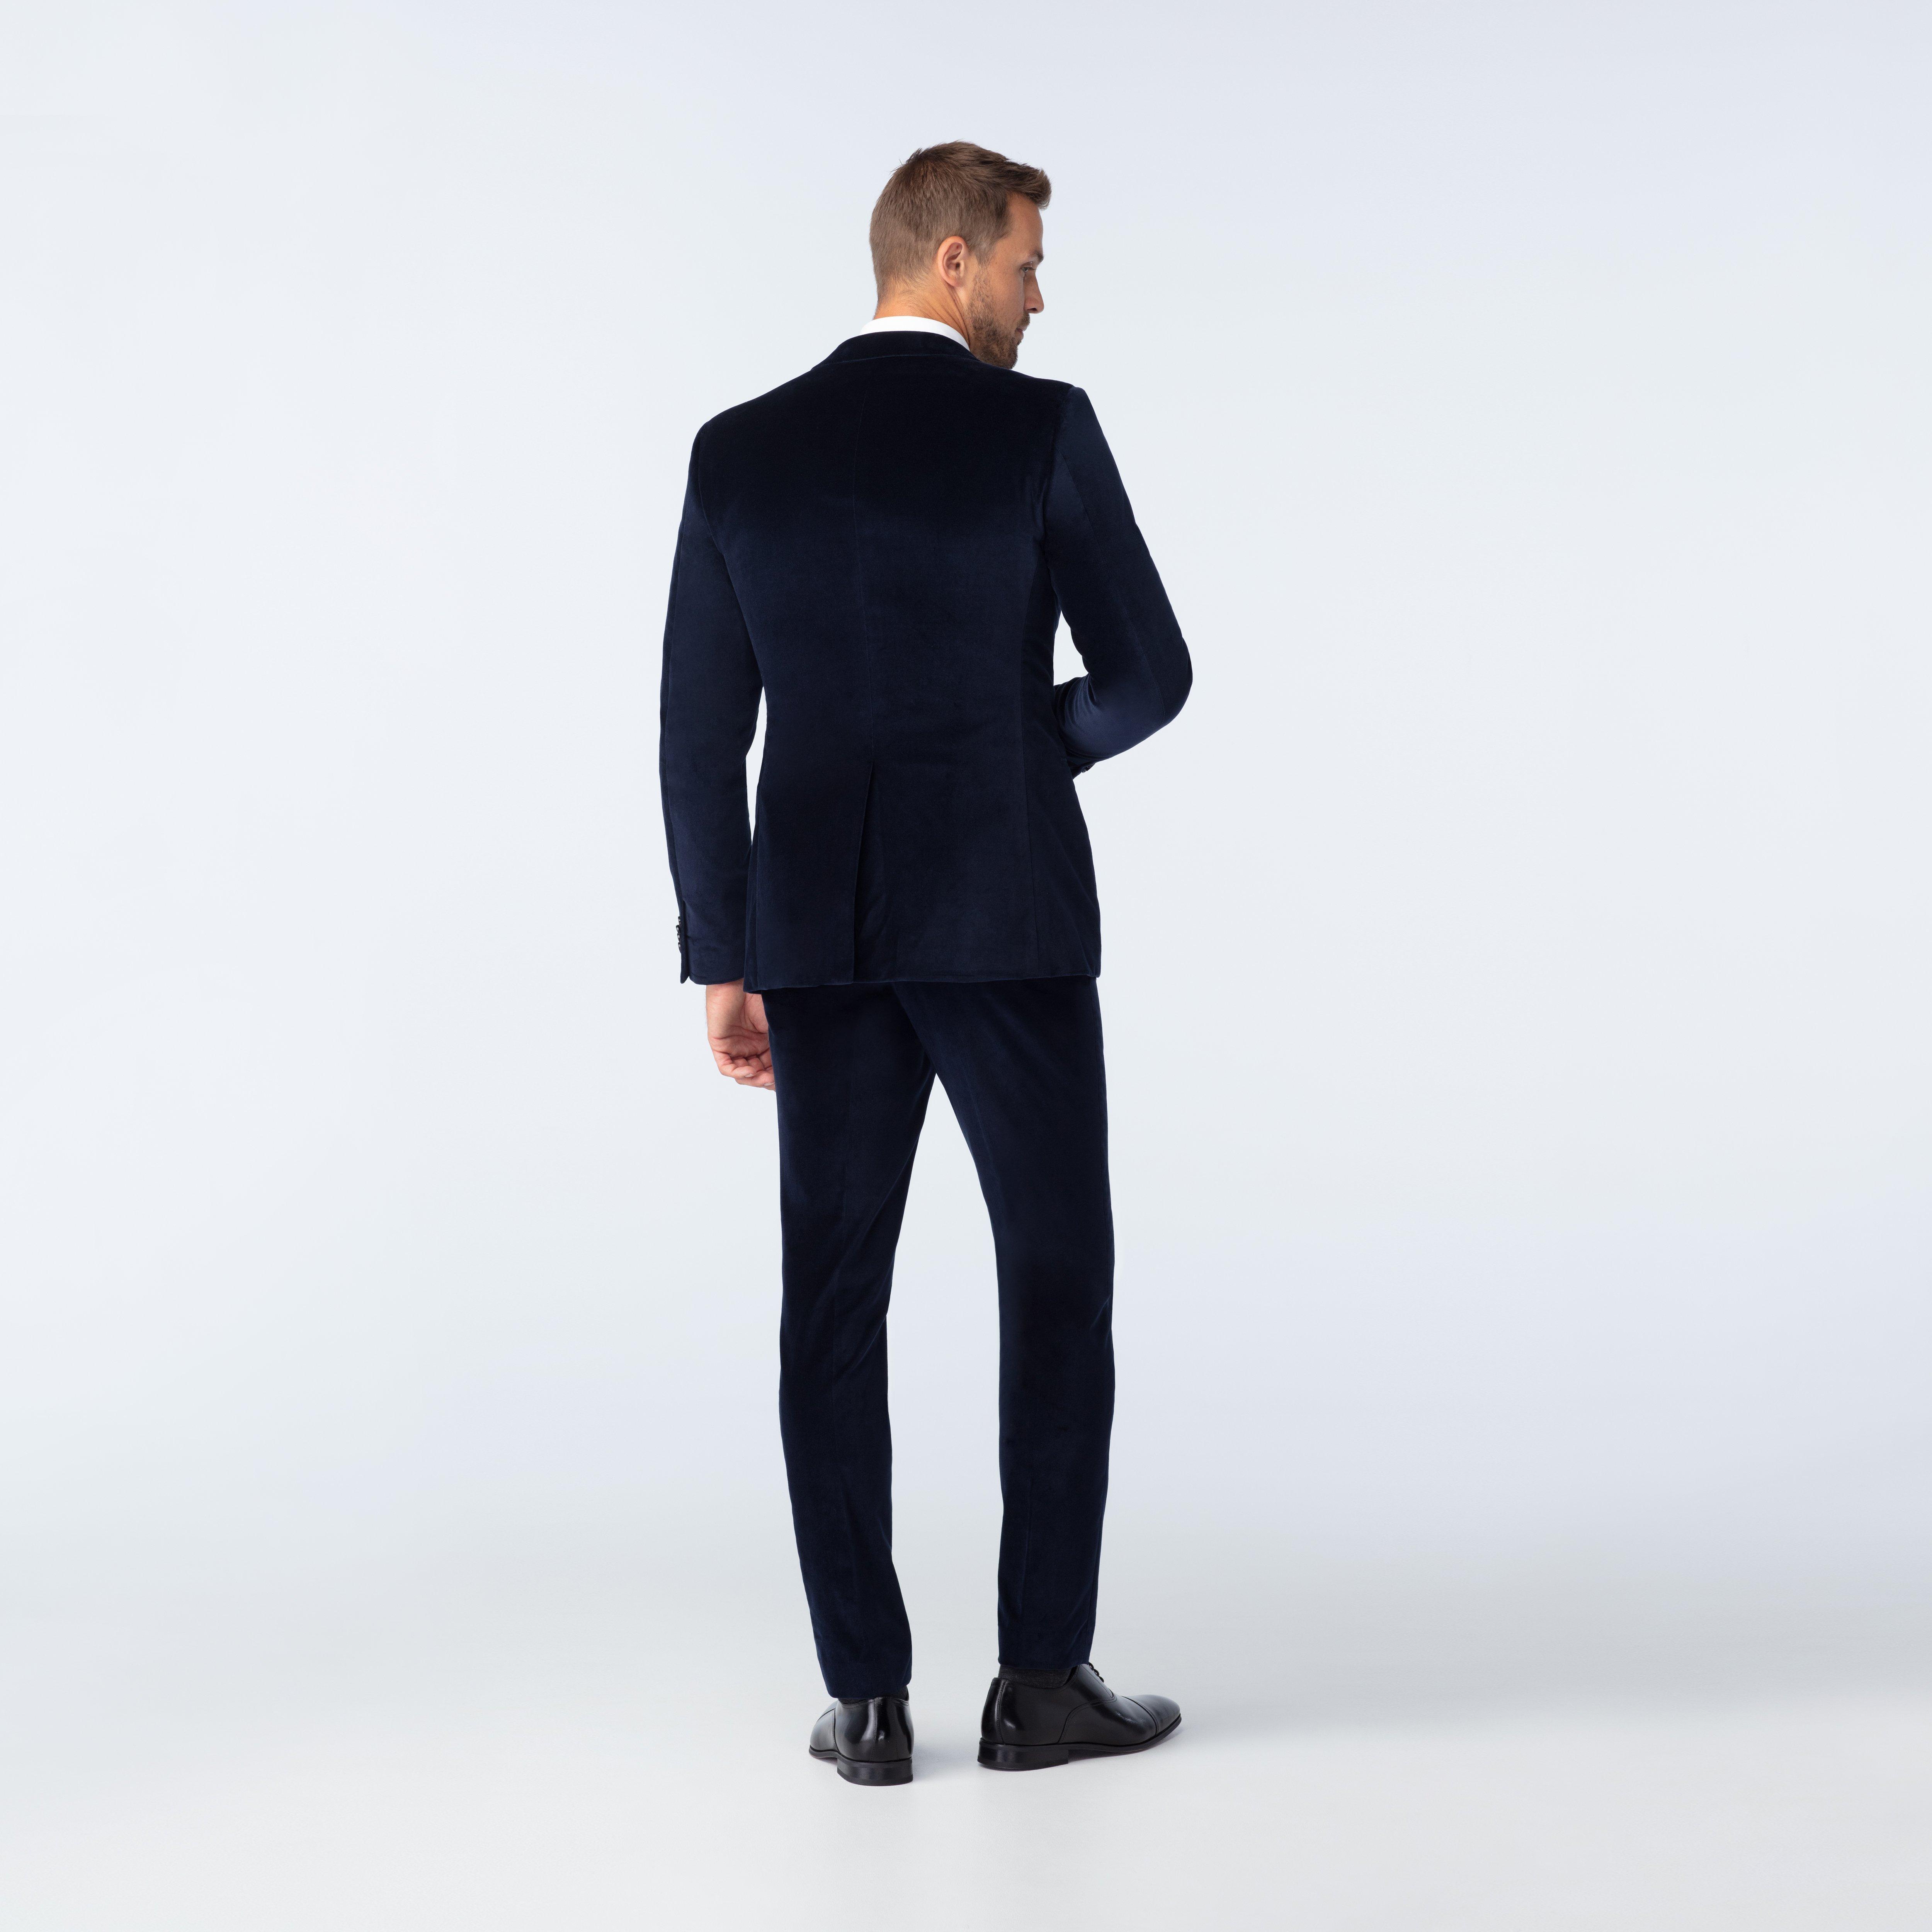 Custom Suits Made For You - Harford Velvet Navy Suit | INDOCHINO